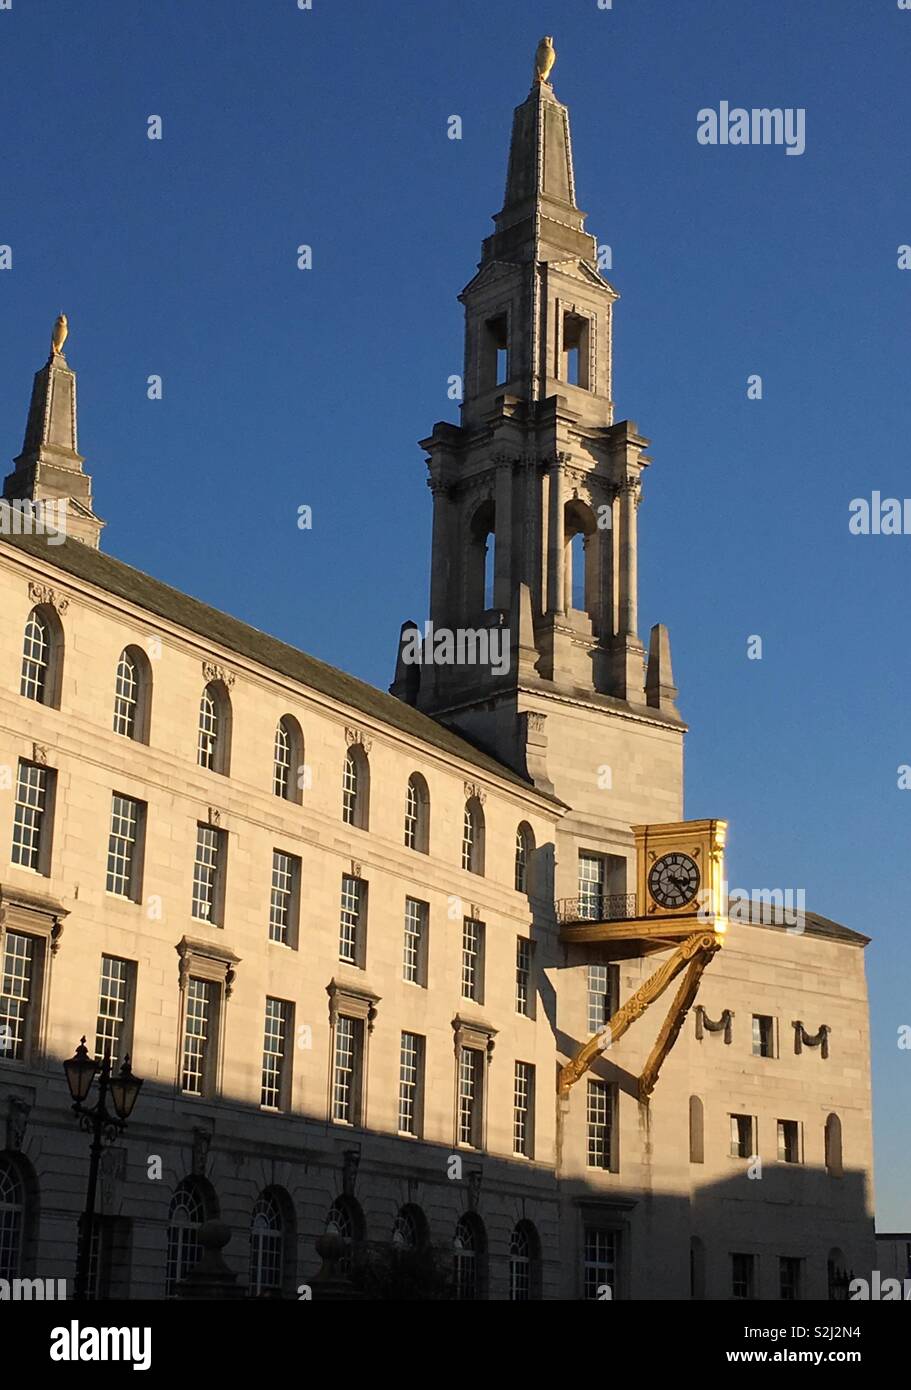 A side view of Leeds Civic Hall, in Millenium Square, West Yorkshire, England, in the evening sunshine. One of the front twin towers can be seen as well as one of the two gilded clocks at the sides. Stock Photo